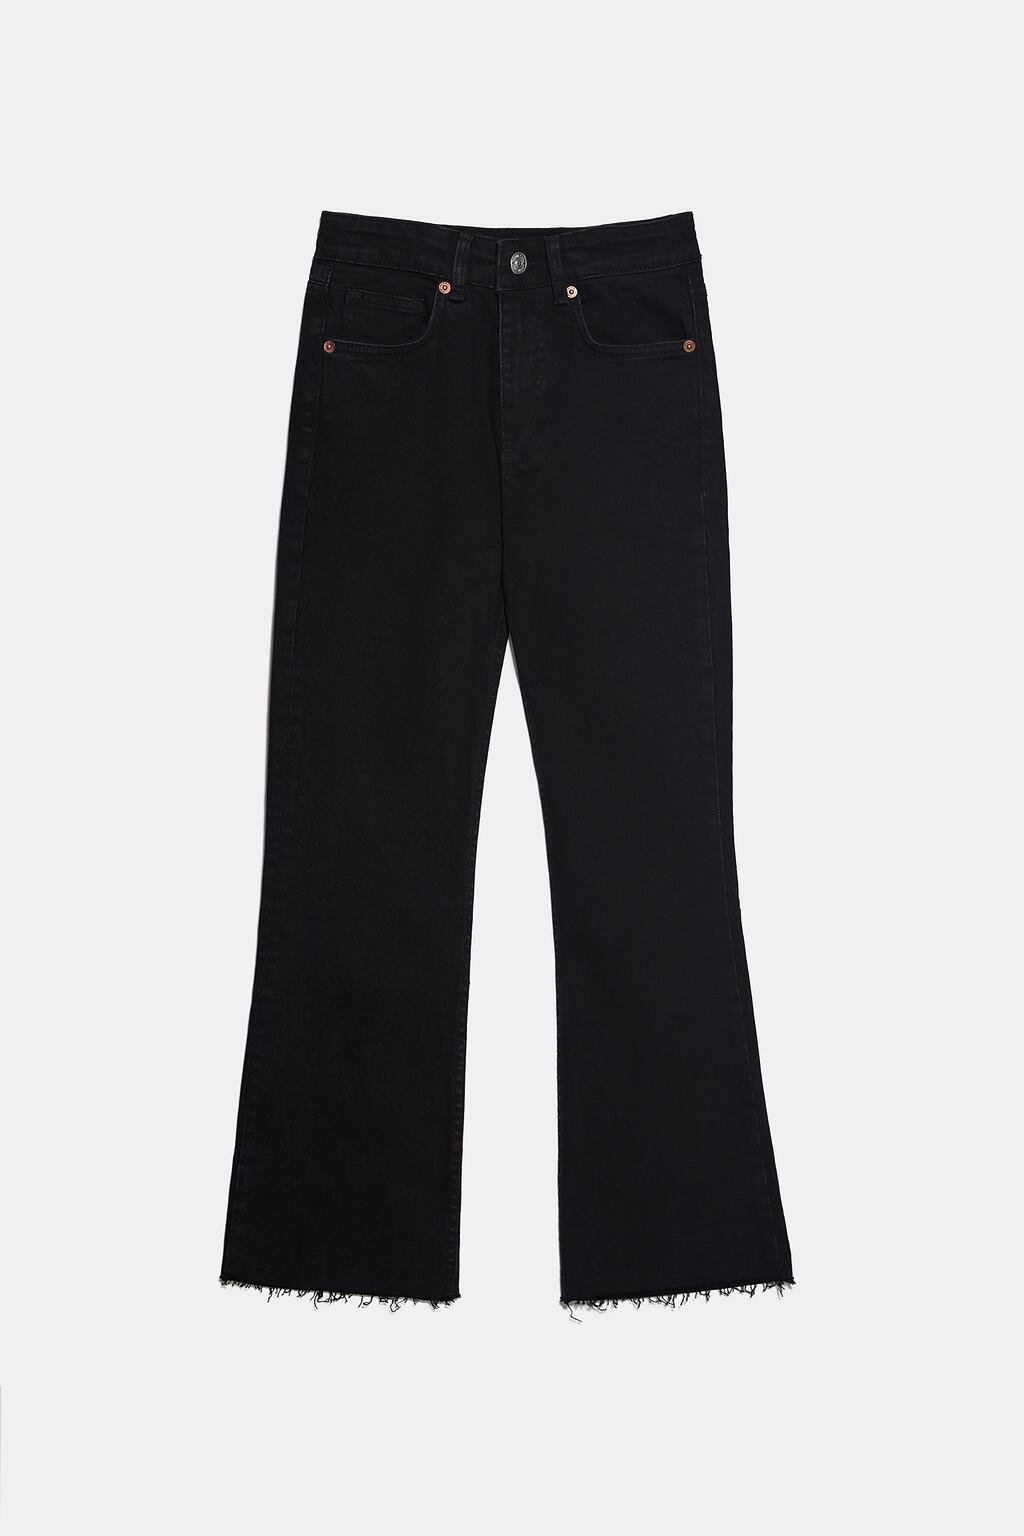 Jeans negros tipo cropped, Zara. Jeans negros tipo cropped